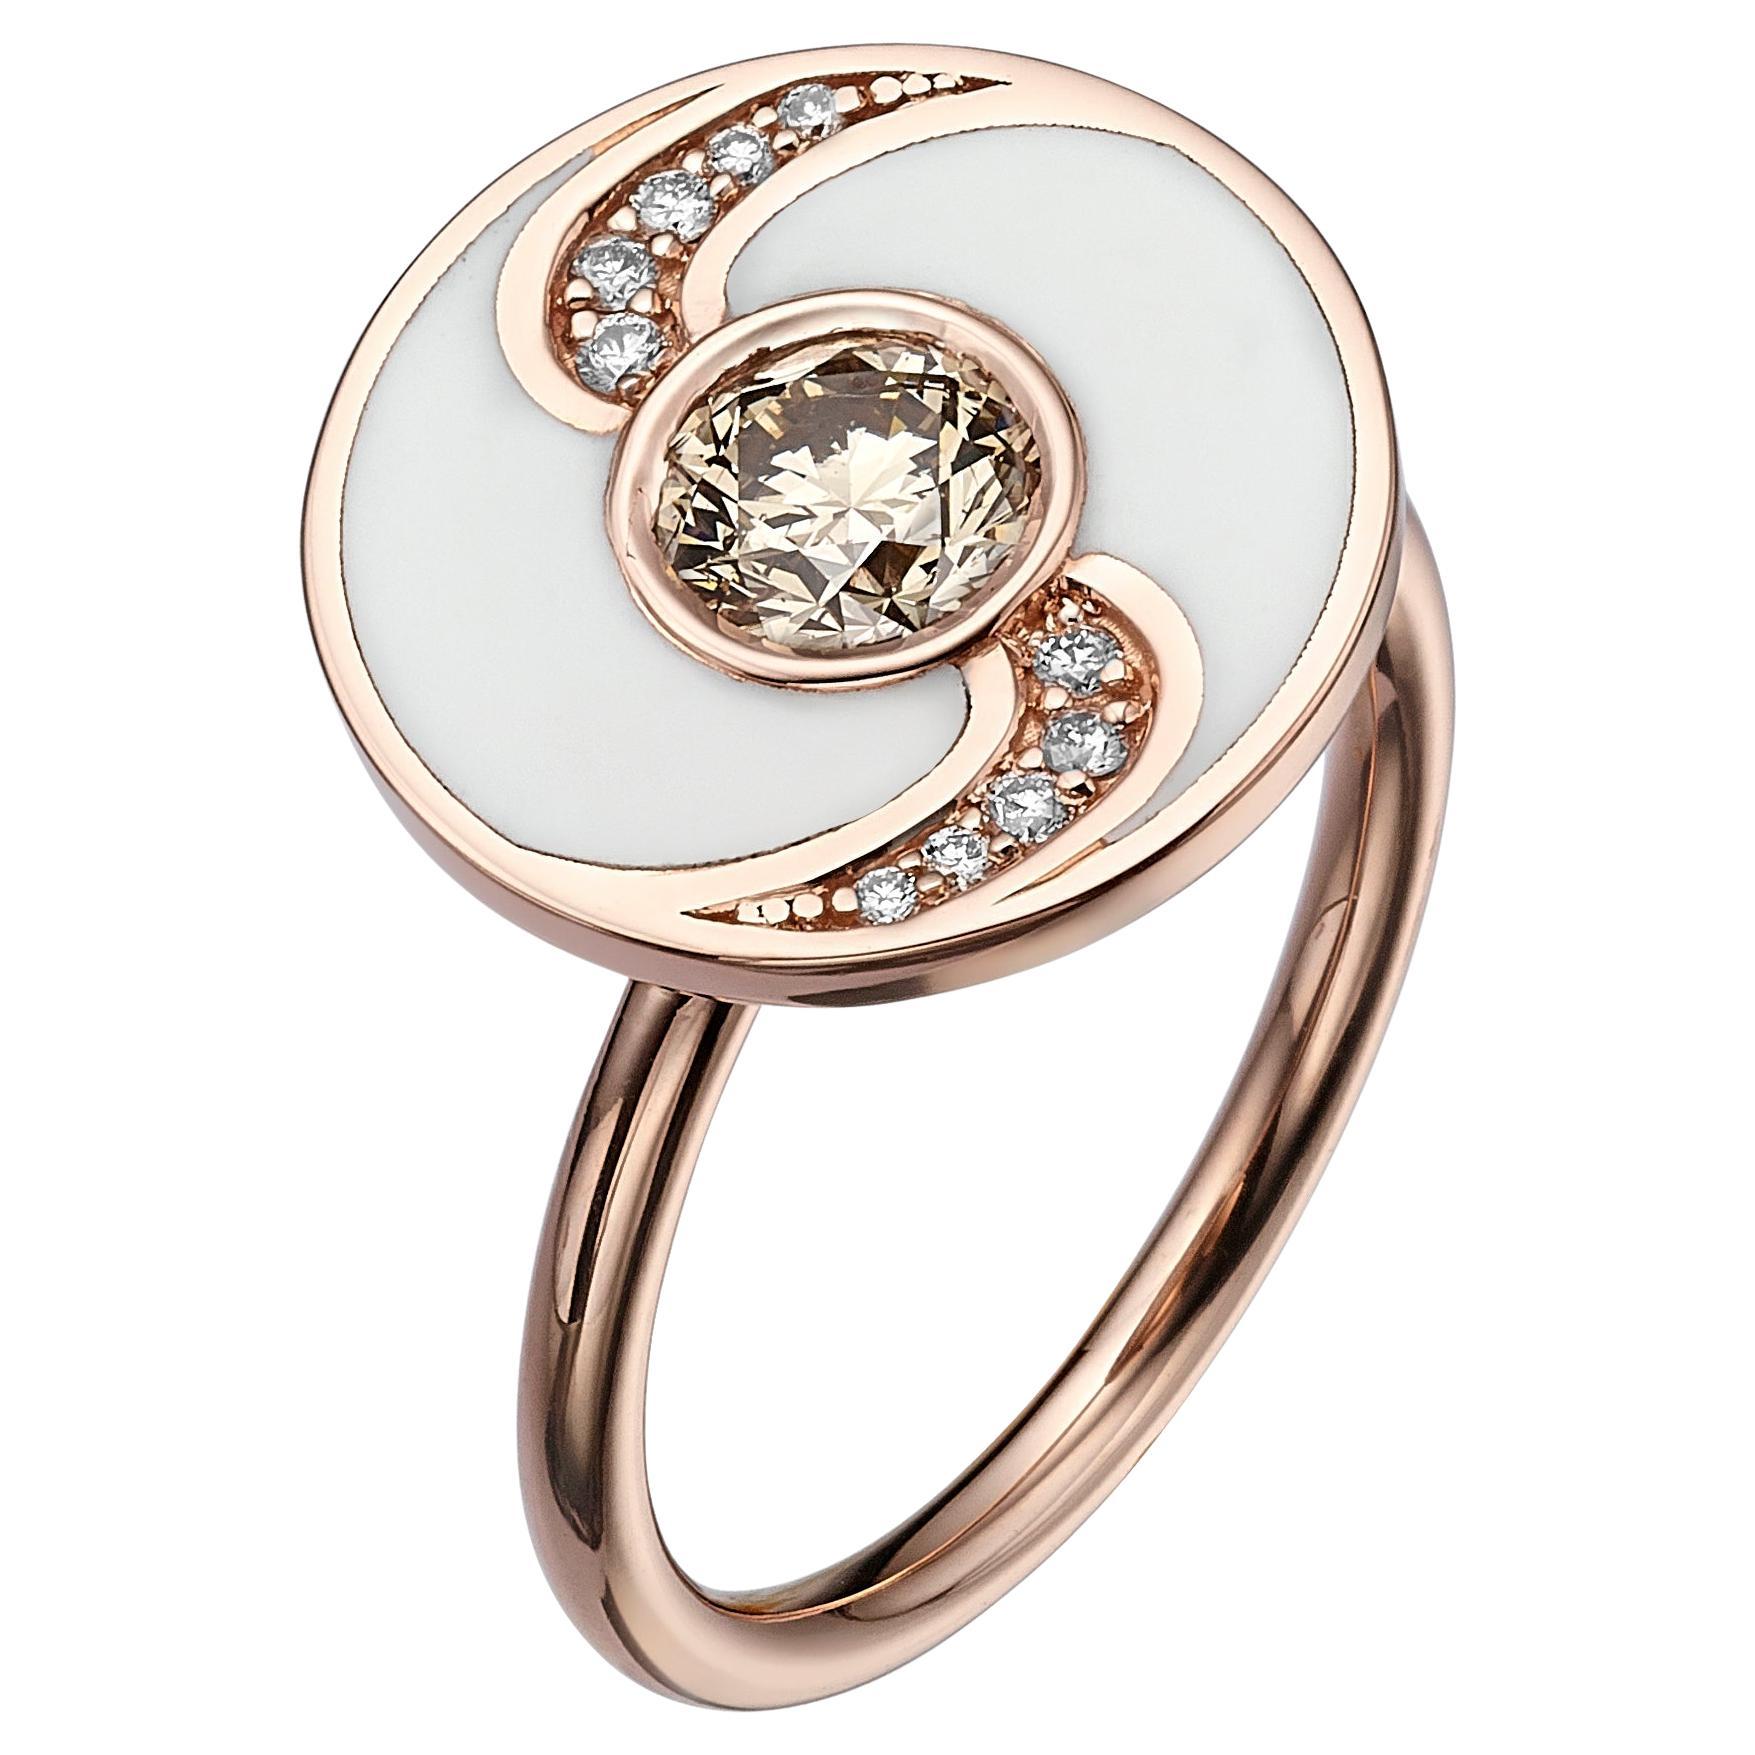 Venice Collection: Round Shaped 18k Rose Gold Diamond Ring with White Enamel